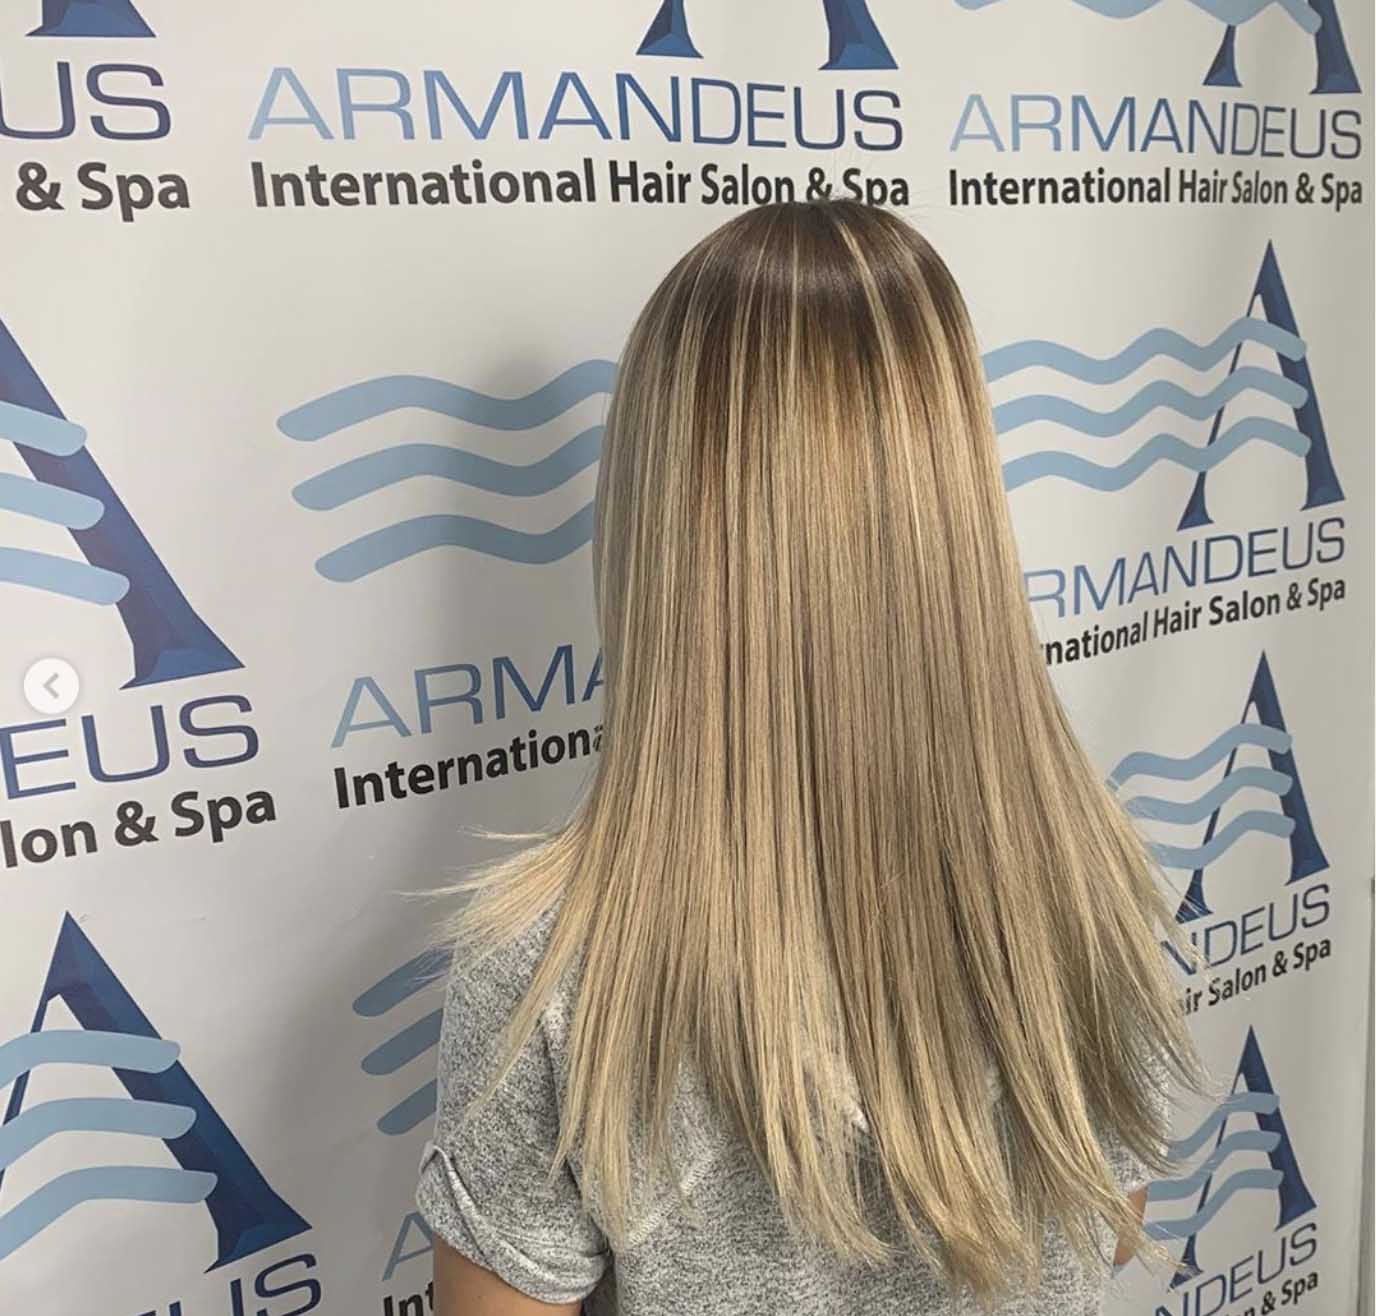 Highlights and hairstyle done at Salon Armandeus Midtown Miami